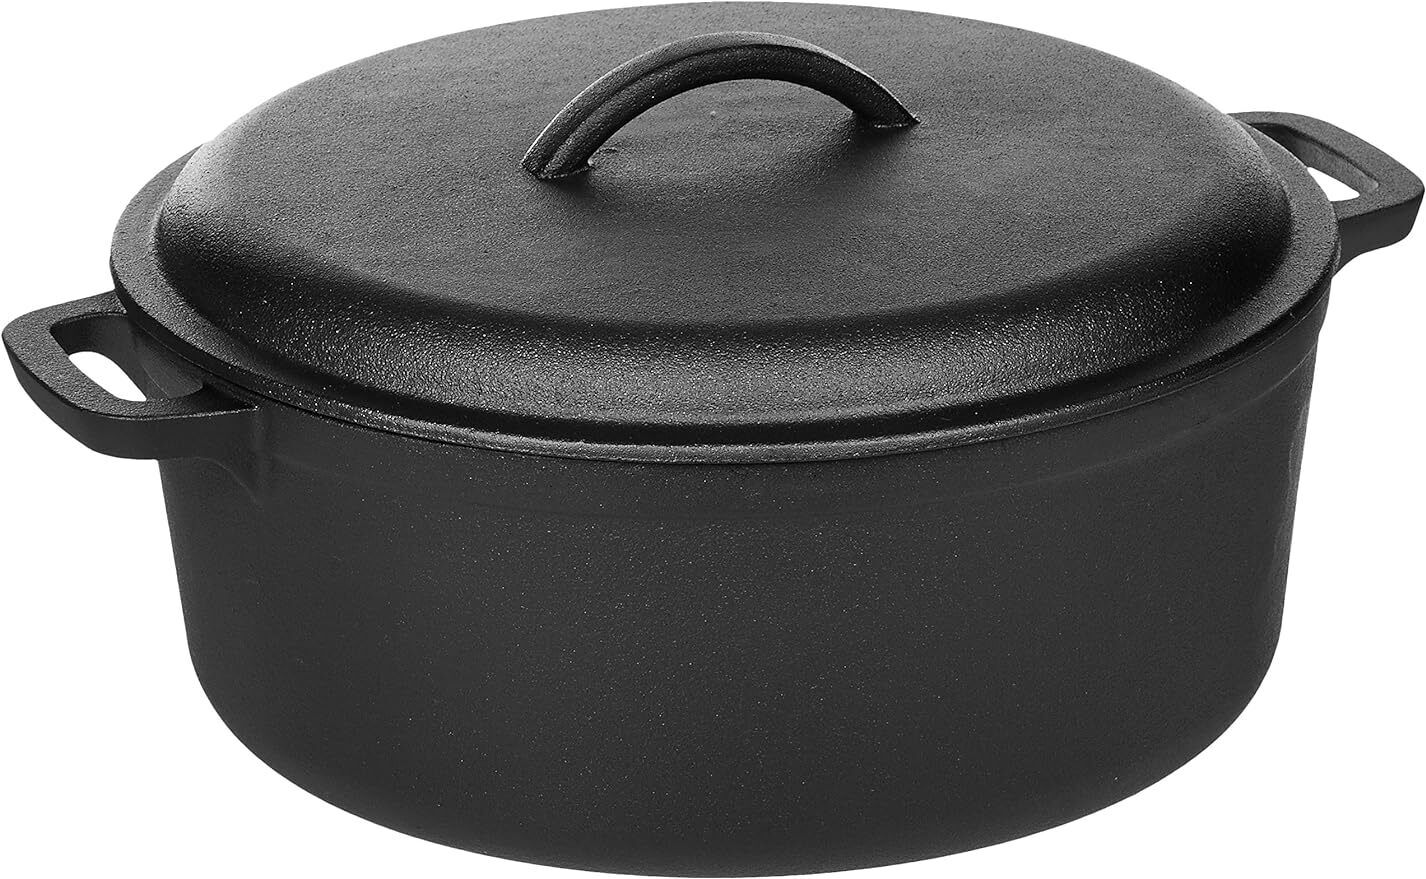 Pre-Seasoned Cast Iron Round Dutch Oven Pot with Lid and Dual Handles 7-Qt Black